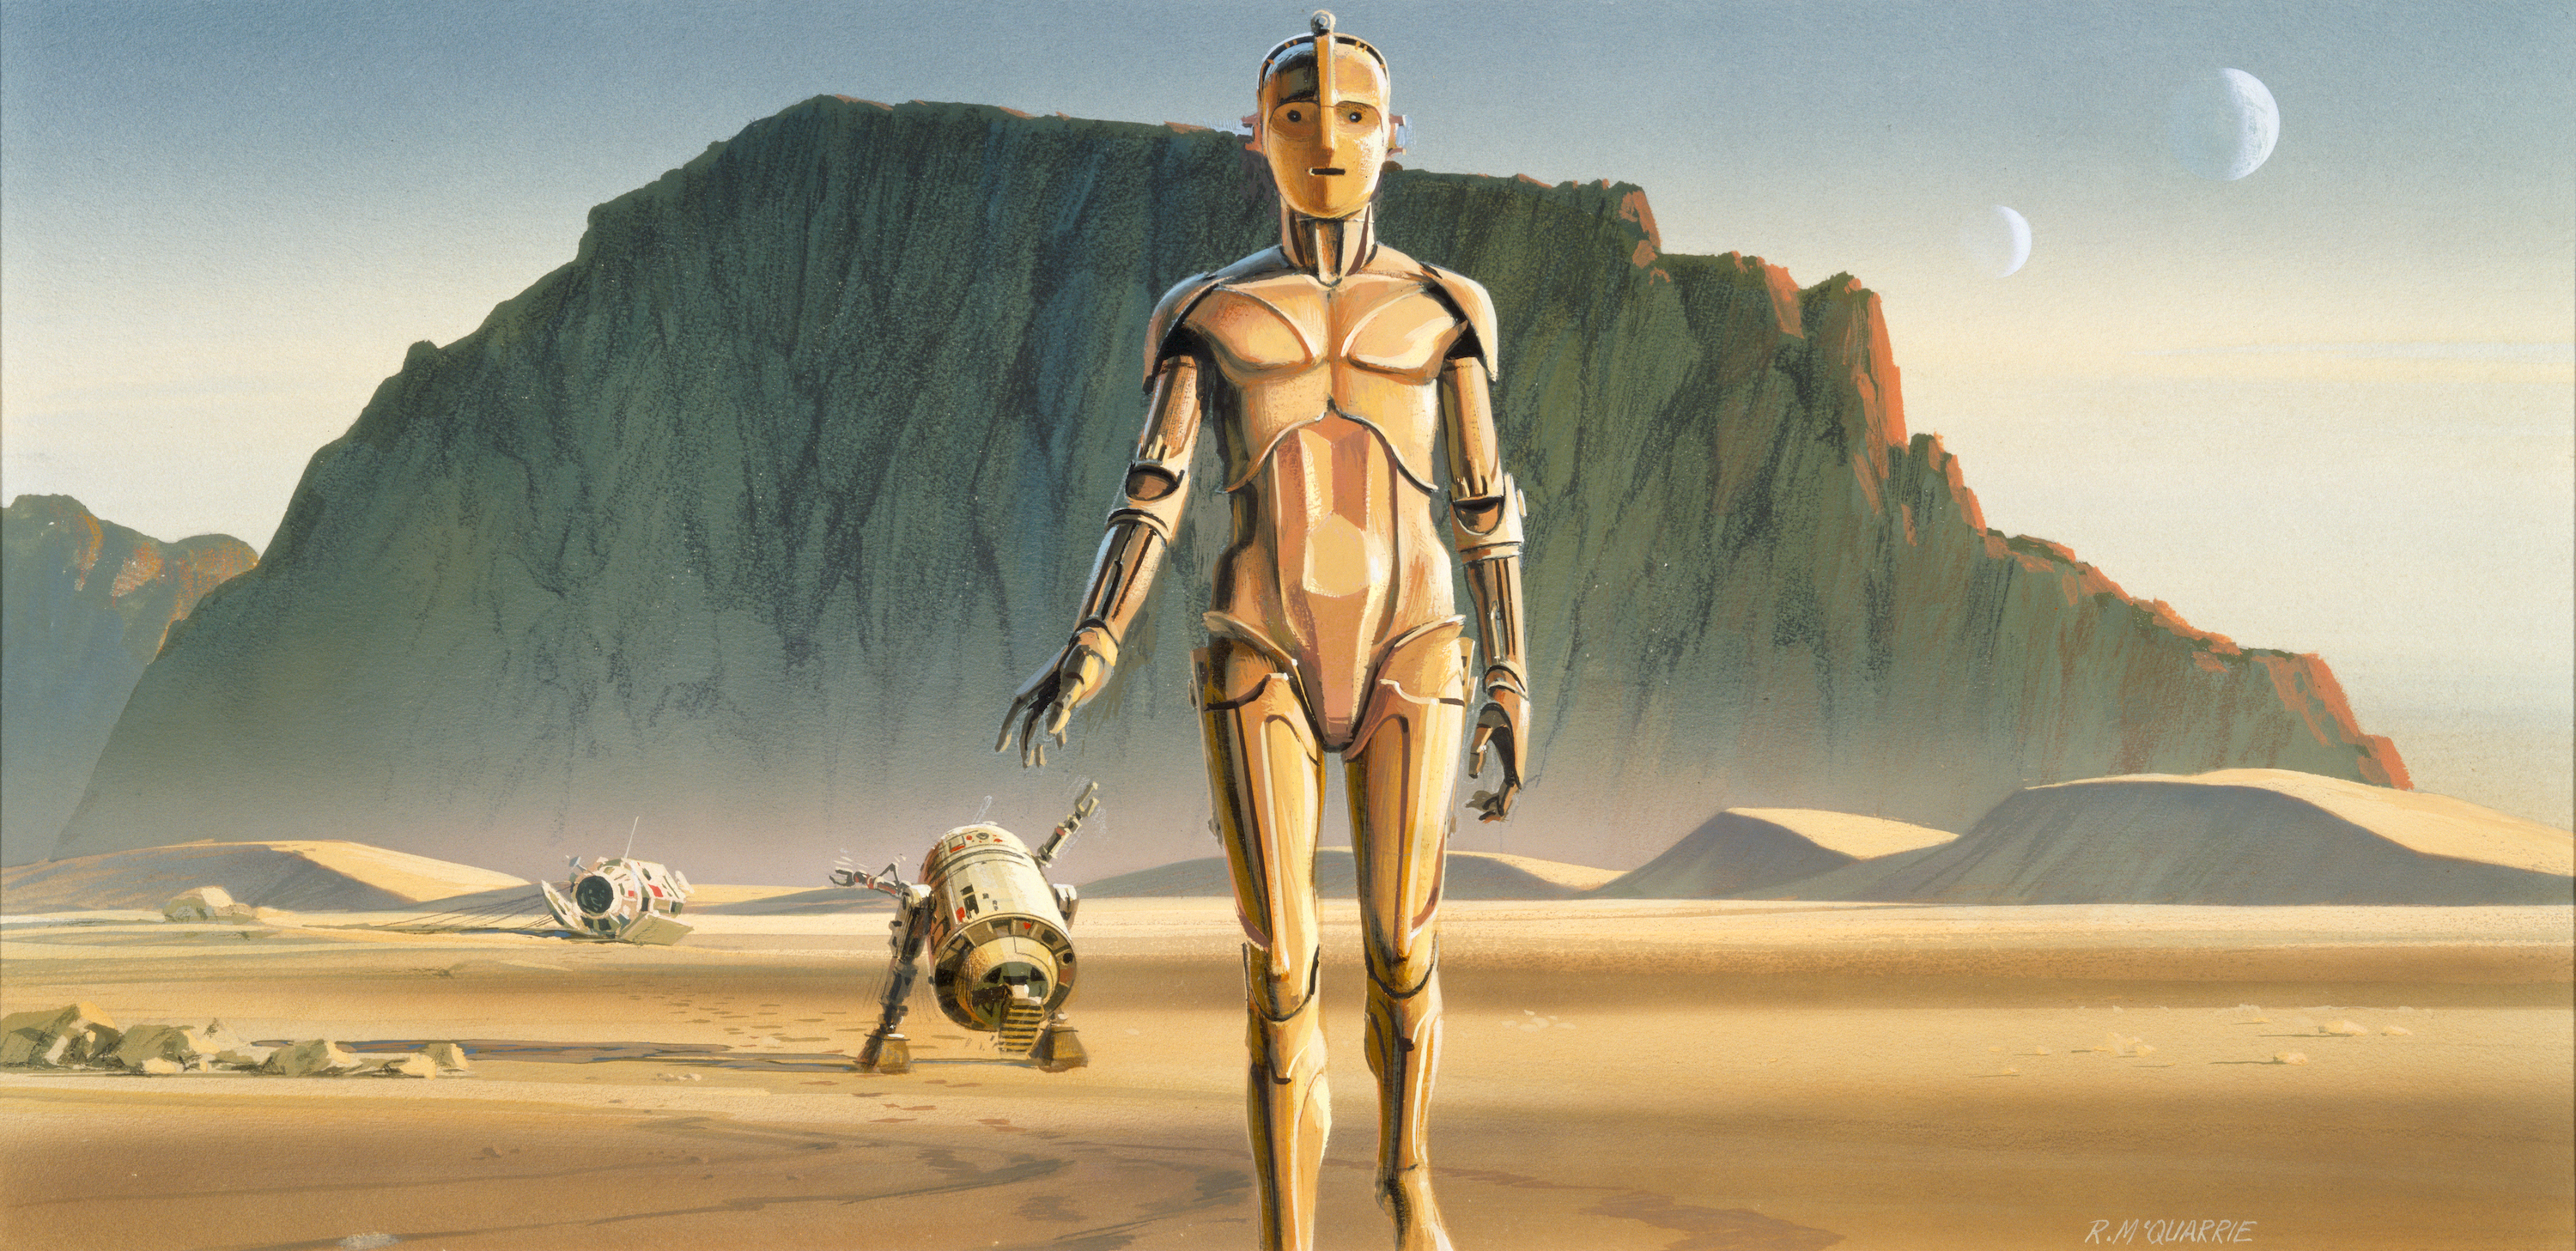 Ralph McQuarrie, production painting for Star Wars Episode IV: A New Hope (Artoo and Threepio leave the pod in the desert), January 31, 1975, Lucas Museum of Narrative Art, Los Angeles, © and TM Lucasfilm Ltd. 2020 All Rights Reserved. Used with permission.